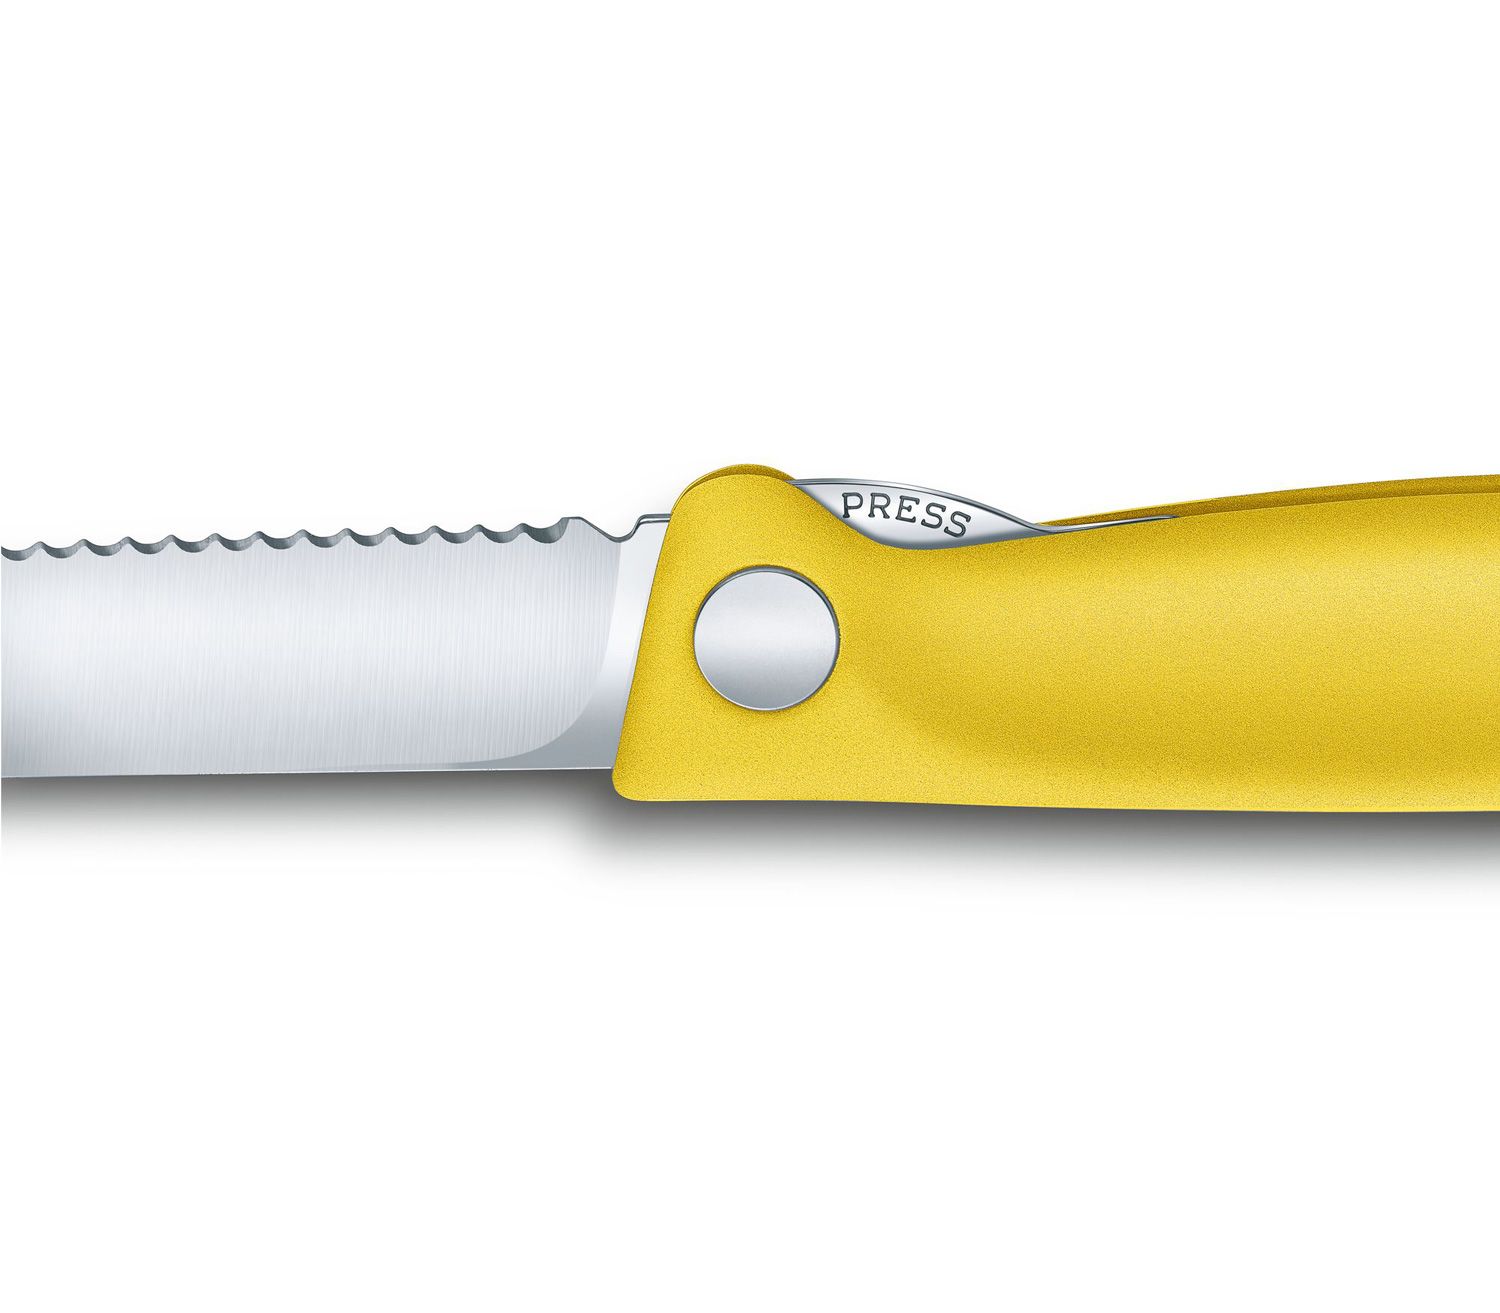 Victorinox Paring Knife - The Peppermill